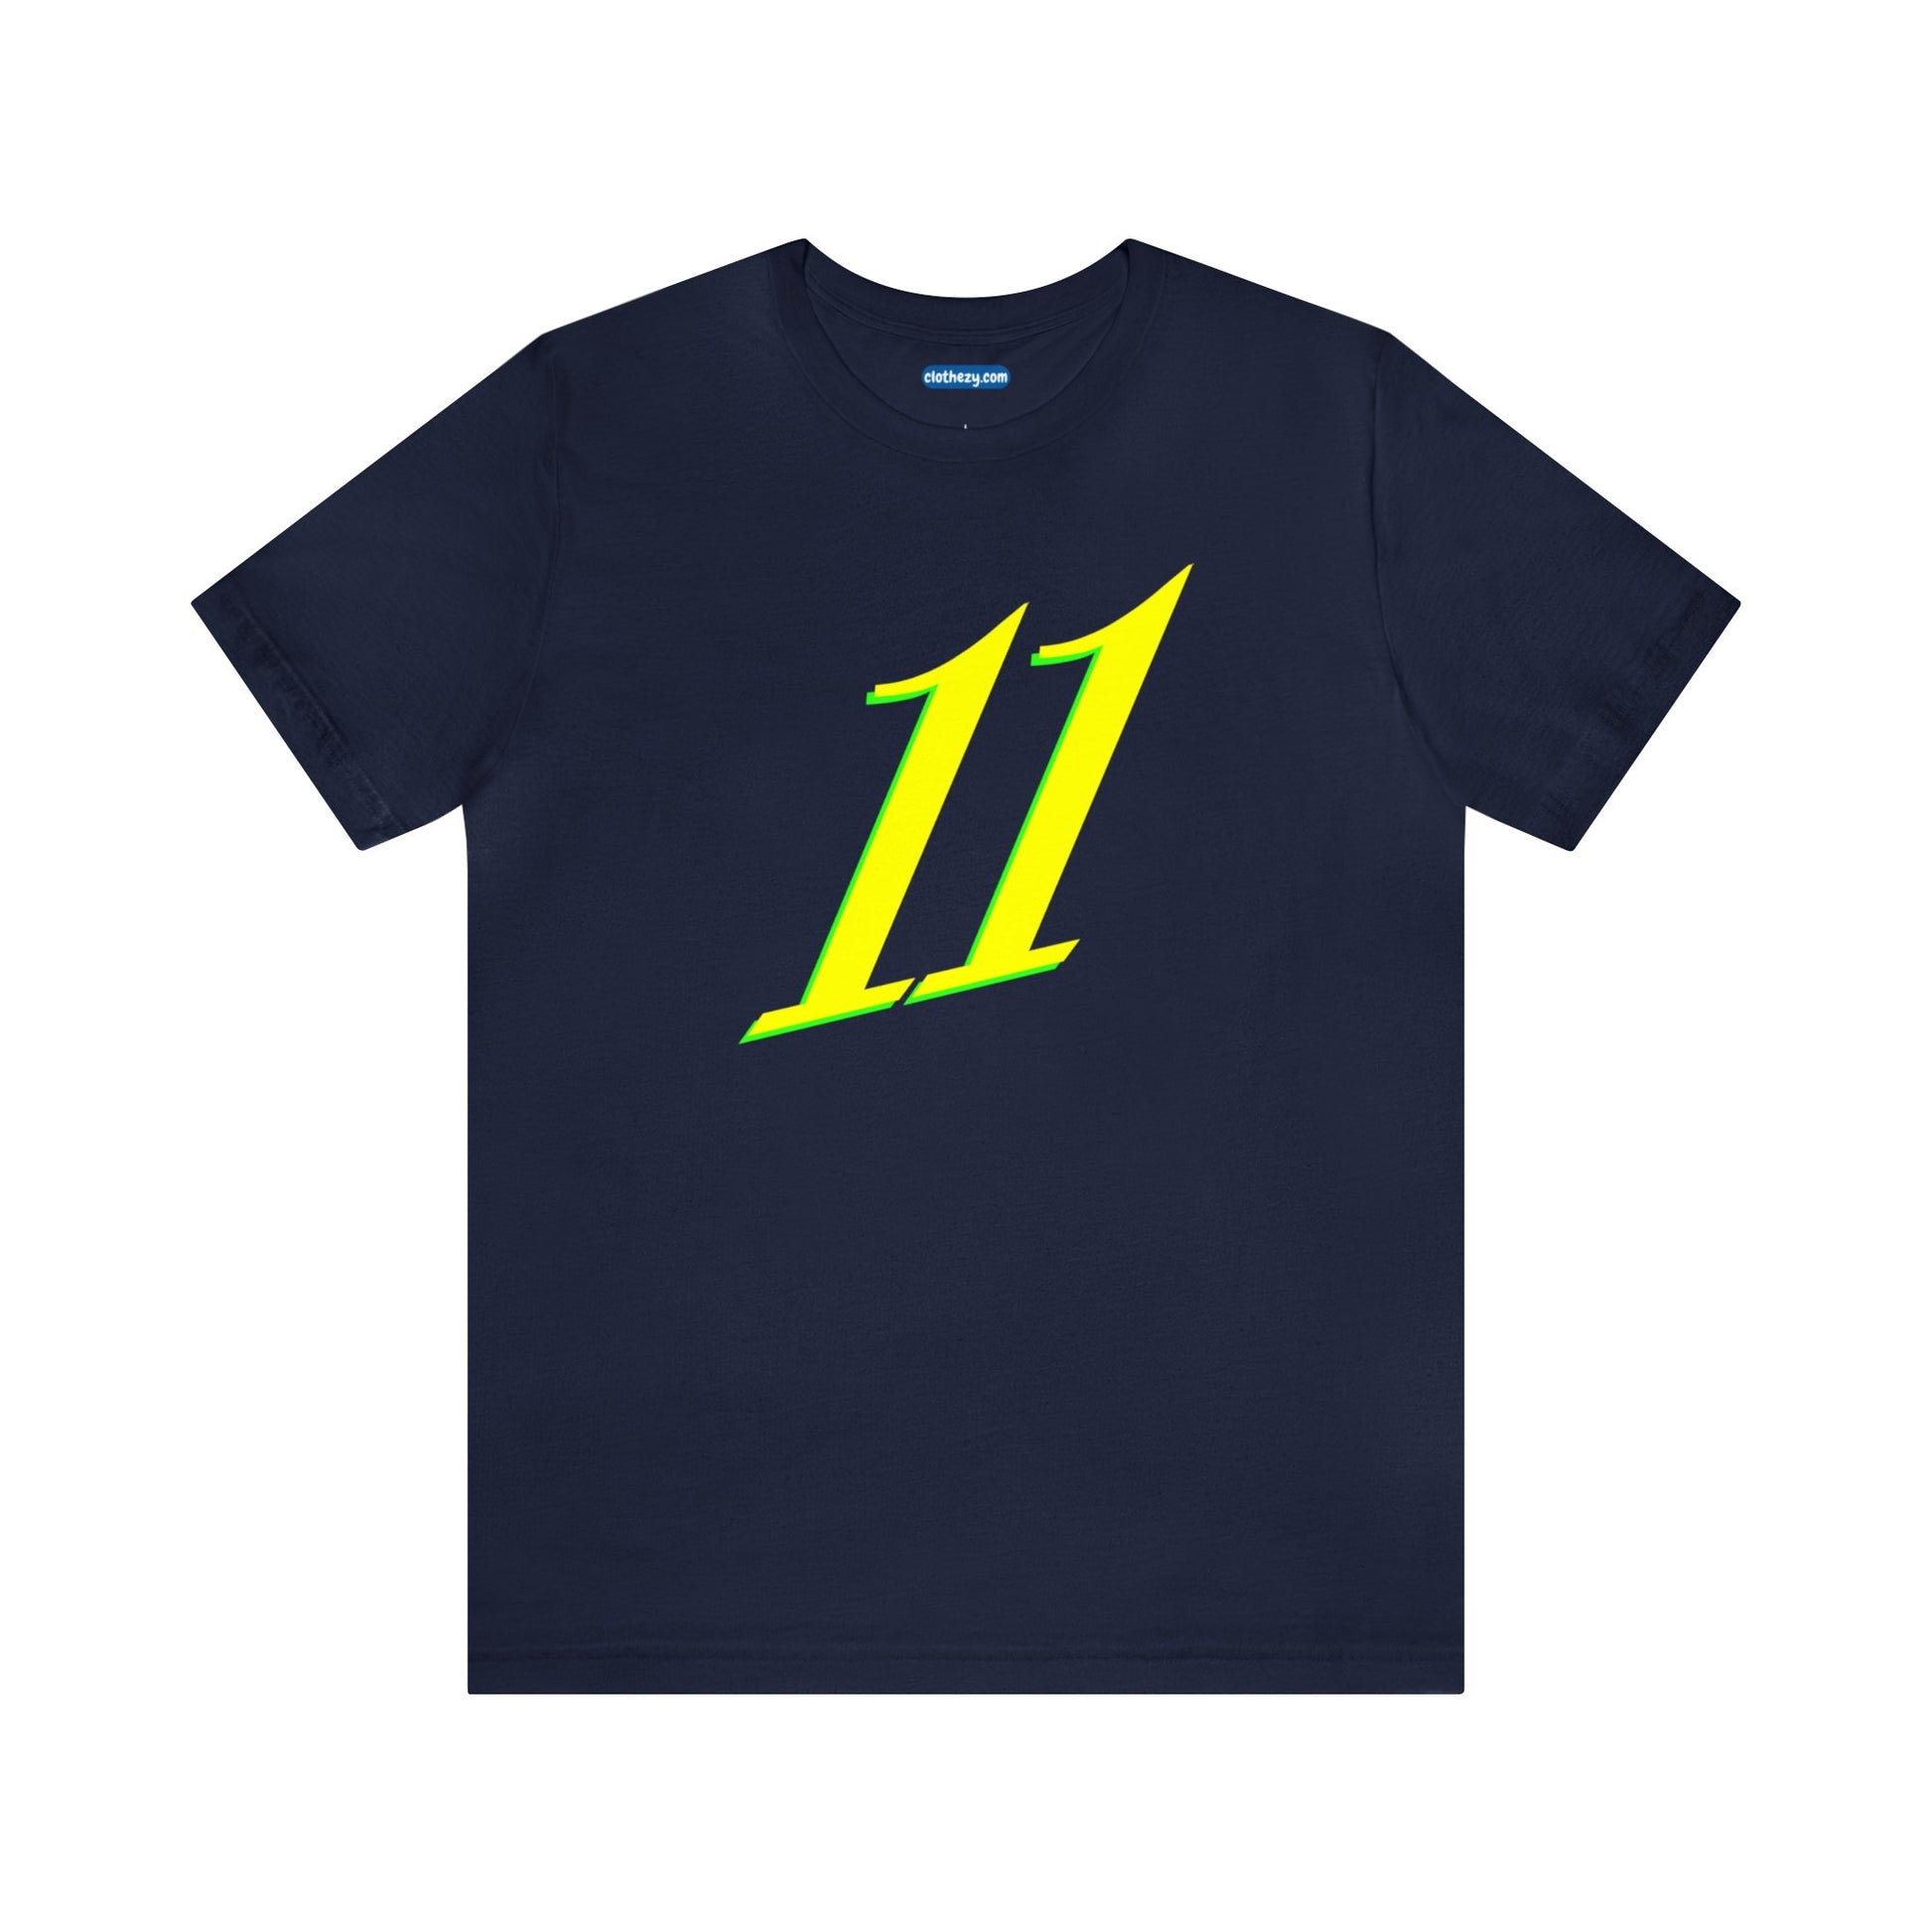 Number 11 Design - Soft Cotton Tee for birthdays and celebrations, Gift for friends and family, Multiple Options by clothezy.com in Navy Size Small - Buy Now